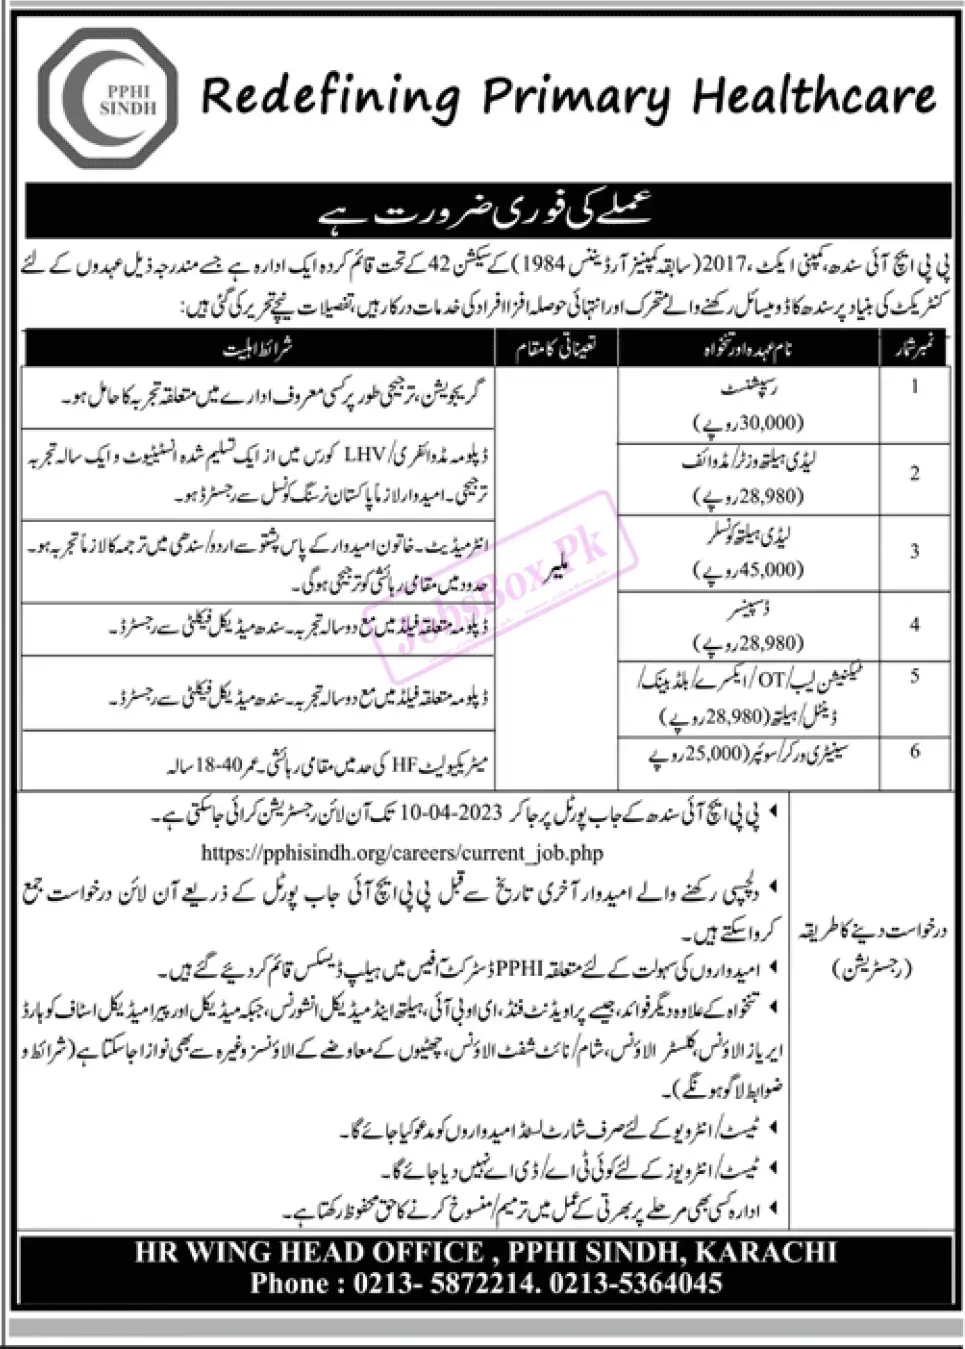 People Primary Health Initiative PPHI Sindh Jobs 2023 – Submit Online Application